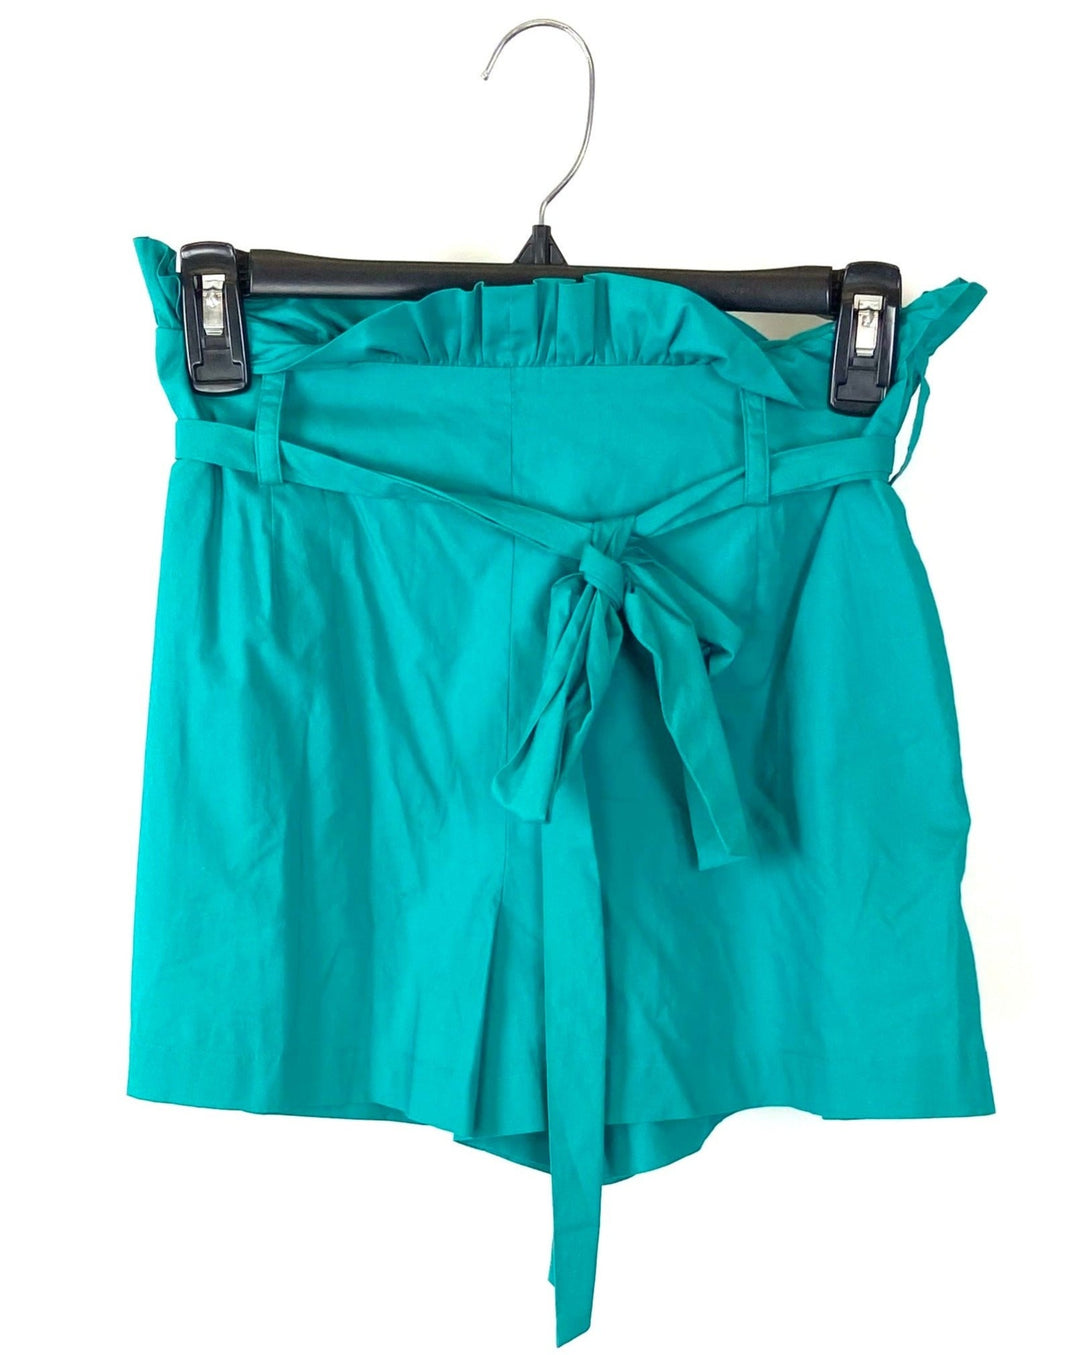 Teal Shorts - Size 4-6